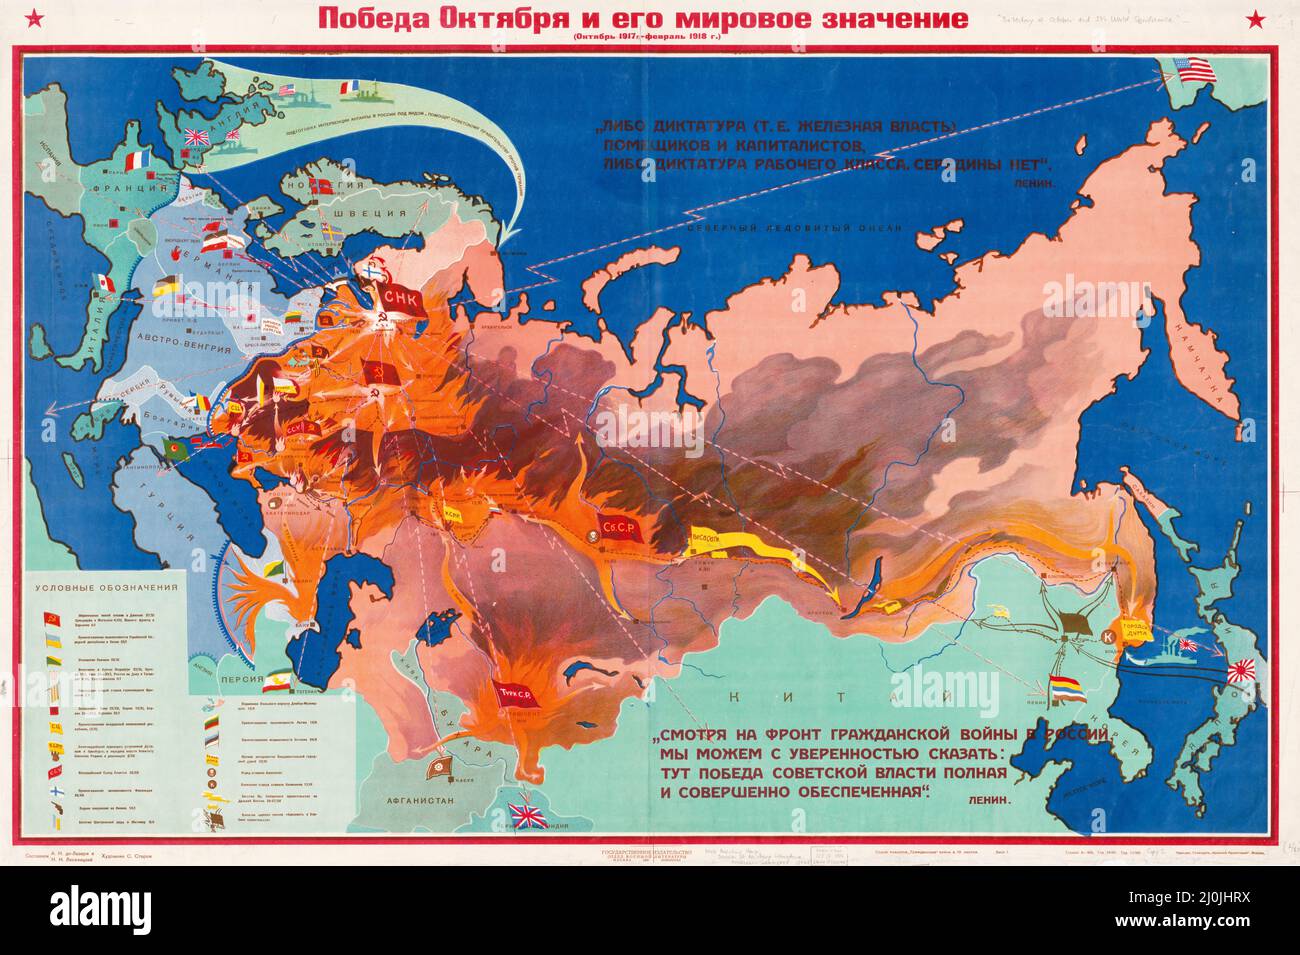 Pictorial map. Map of Russia, 1928, to illustrate the military successes of the Red Army in the Russian Civil War of 1917-1922. Stock Photo